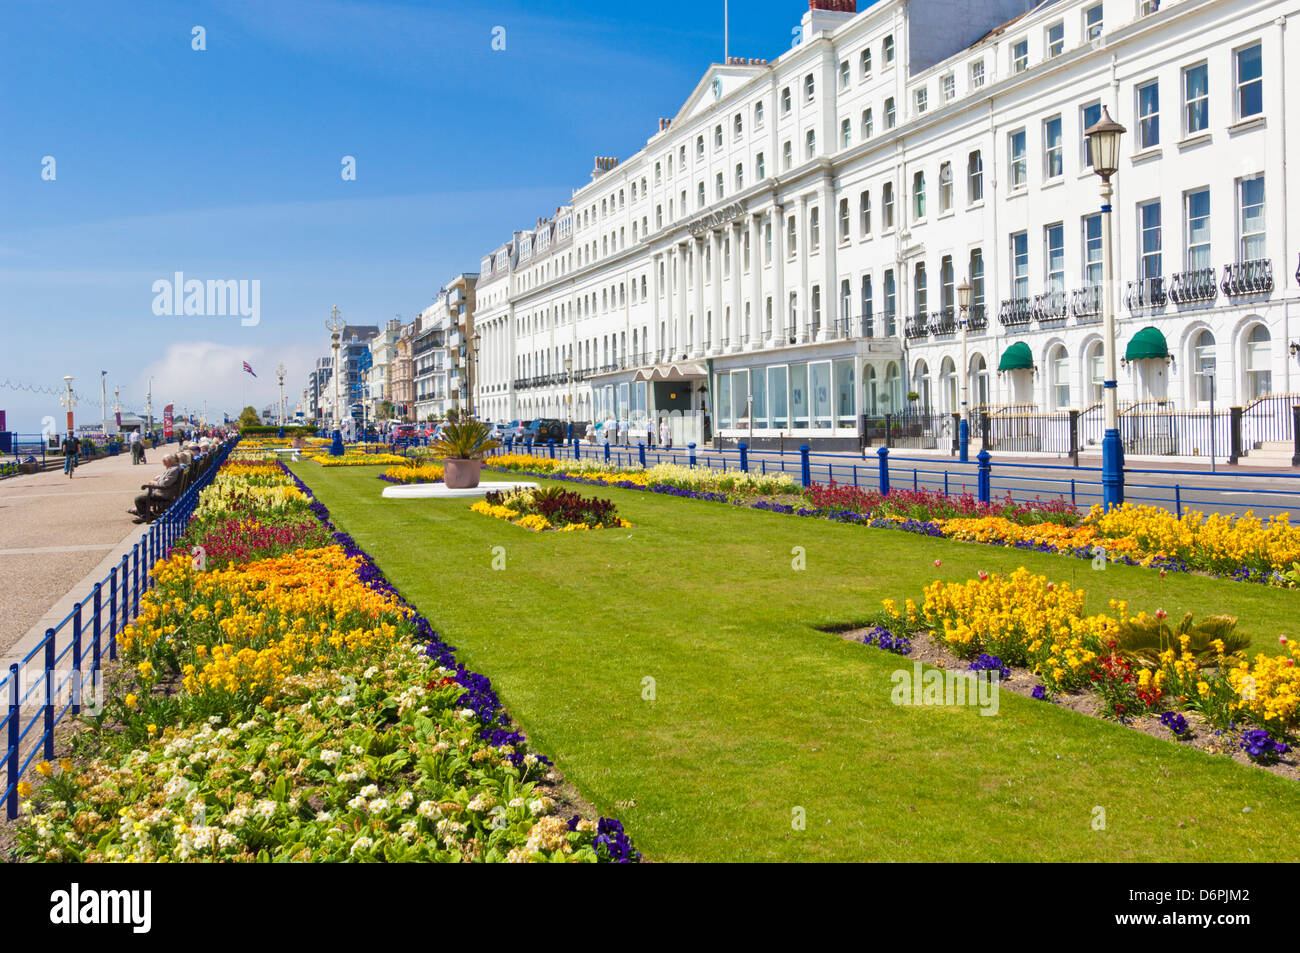 Hotels on the seafront promenade, flower filled gardens, Eastbourne, East Sussex, England, GB, UK, EU, Europe Stock Photo